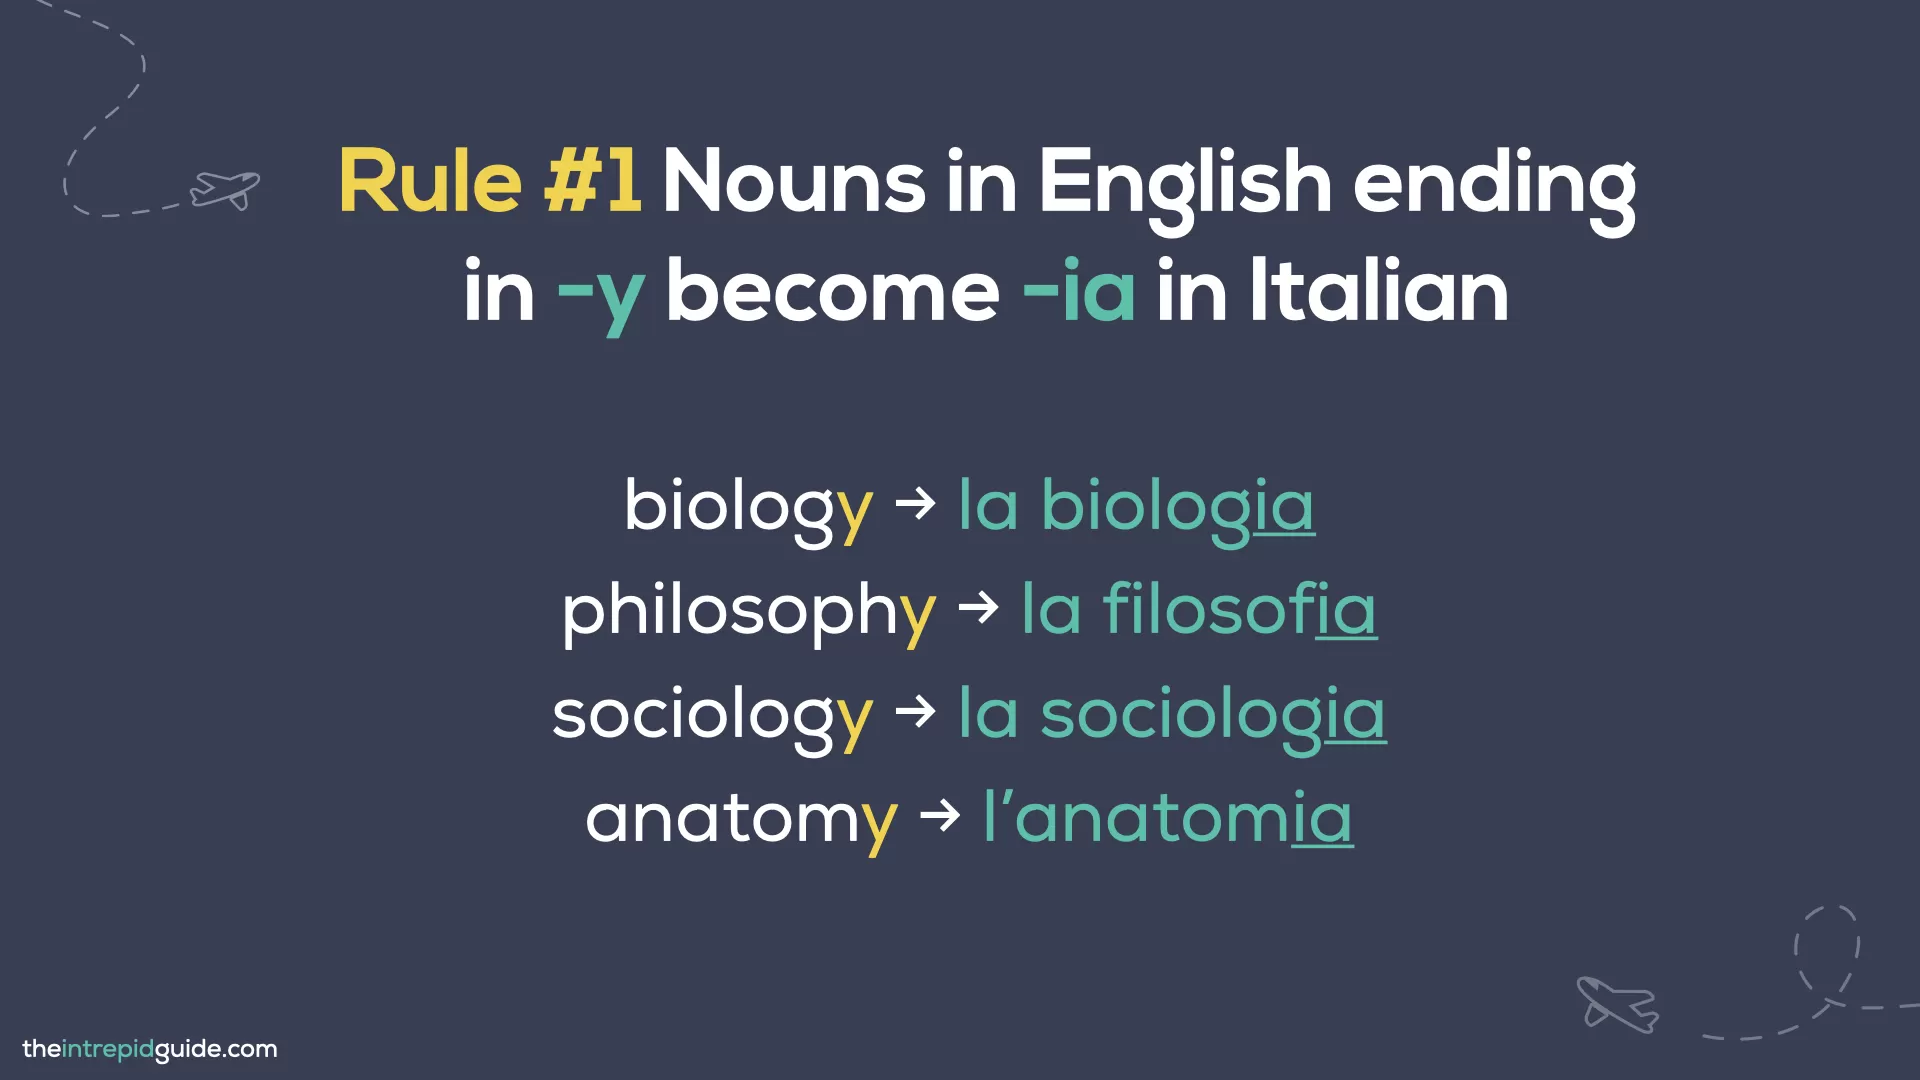 Italian cognates and loan words - Rule 1 - Nouns in English ending in -y become -ia in Italian